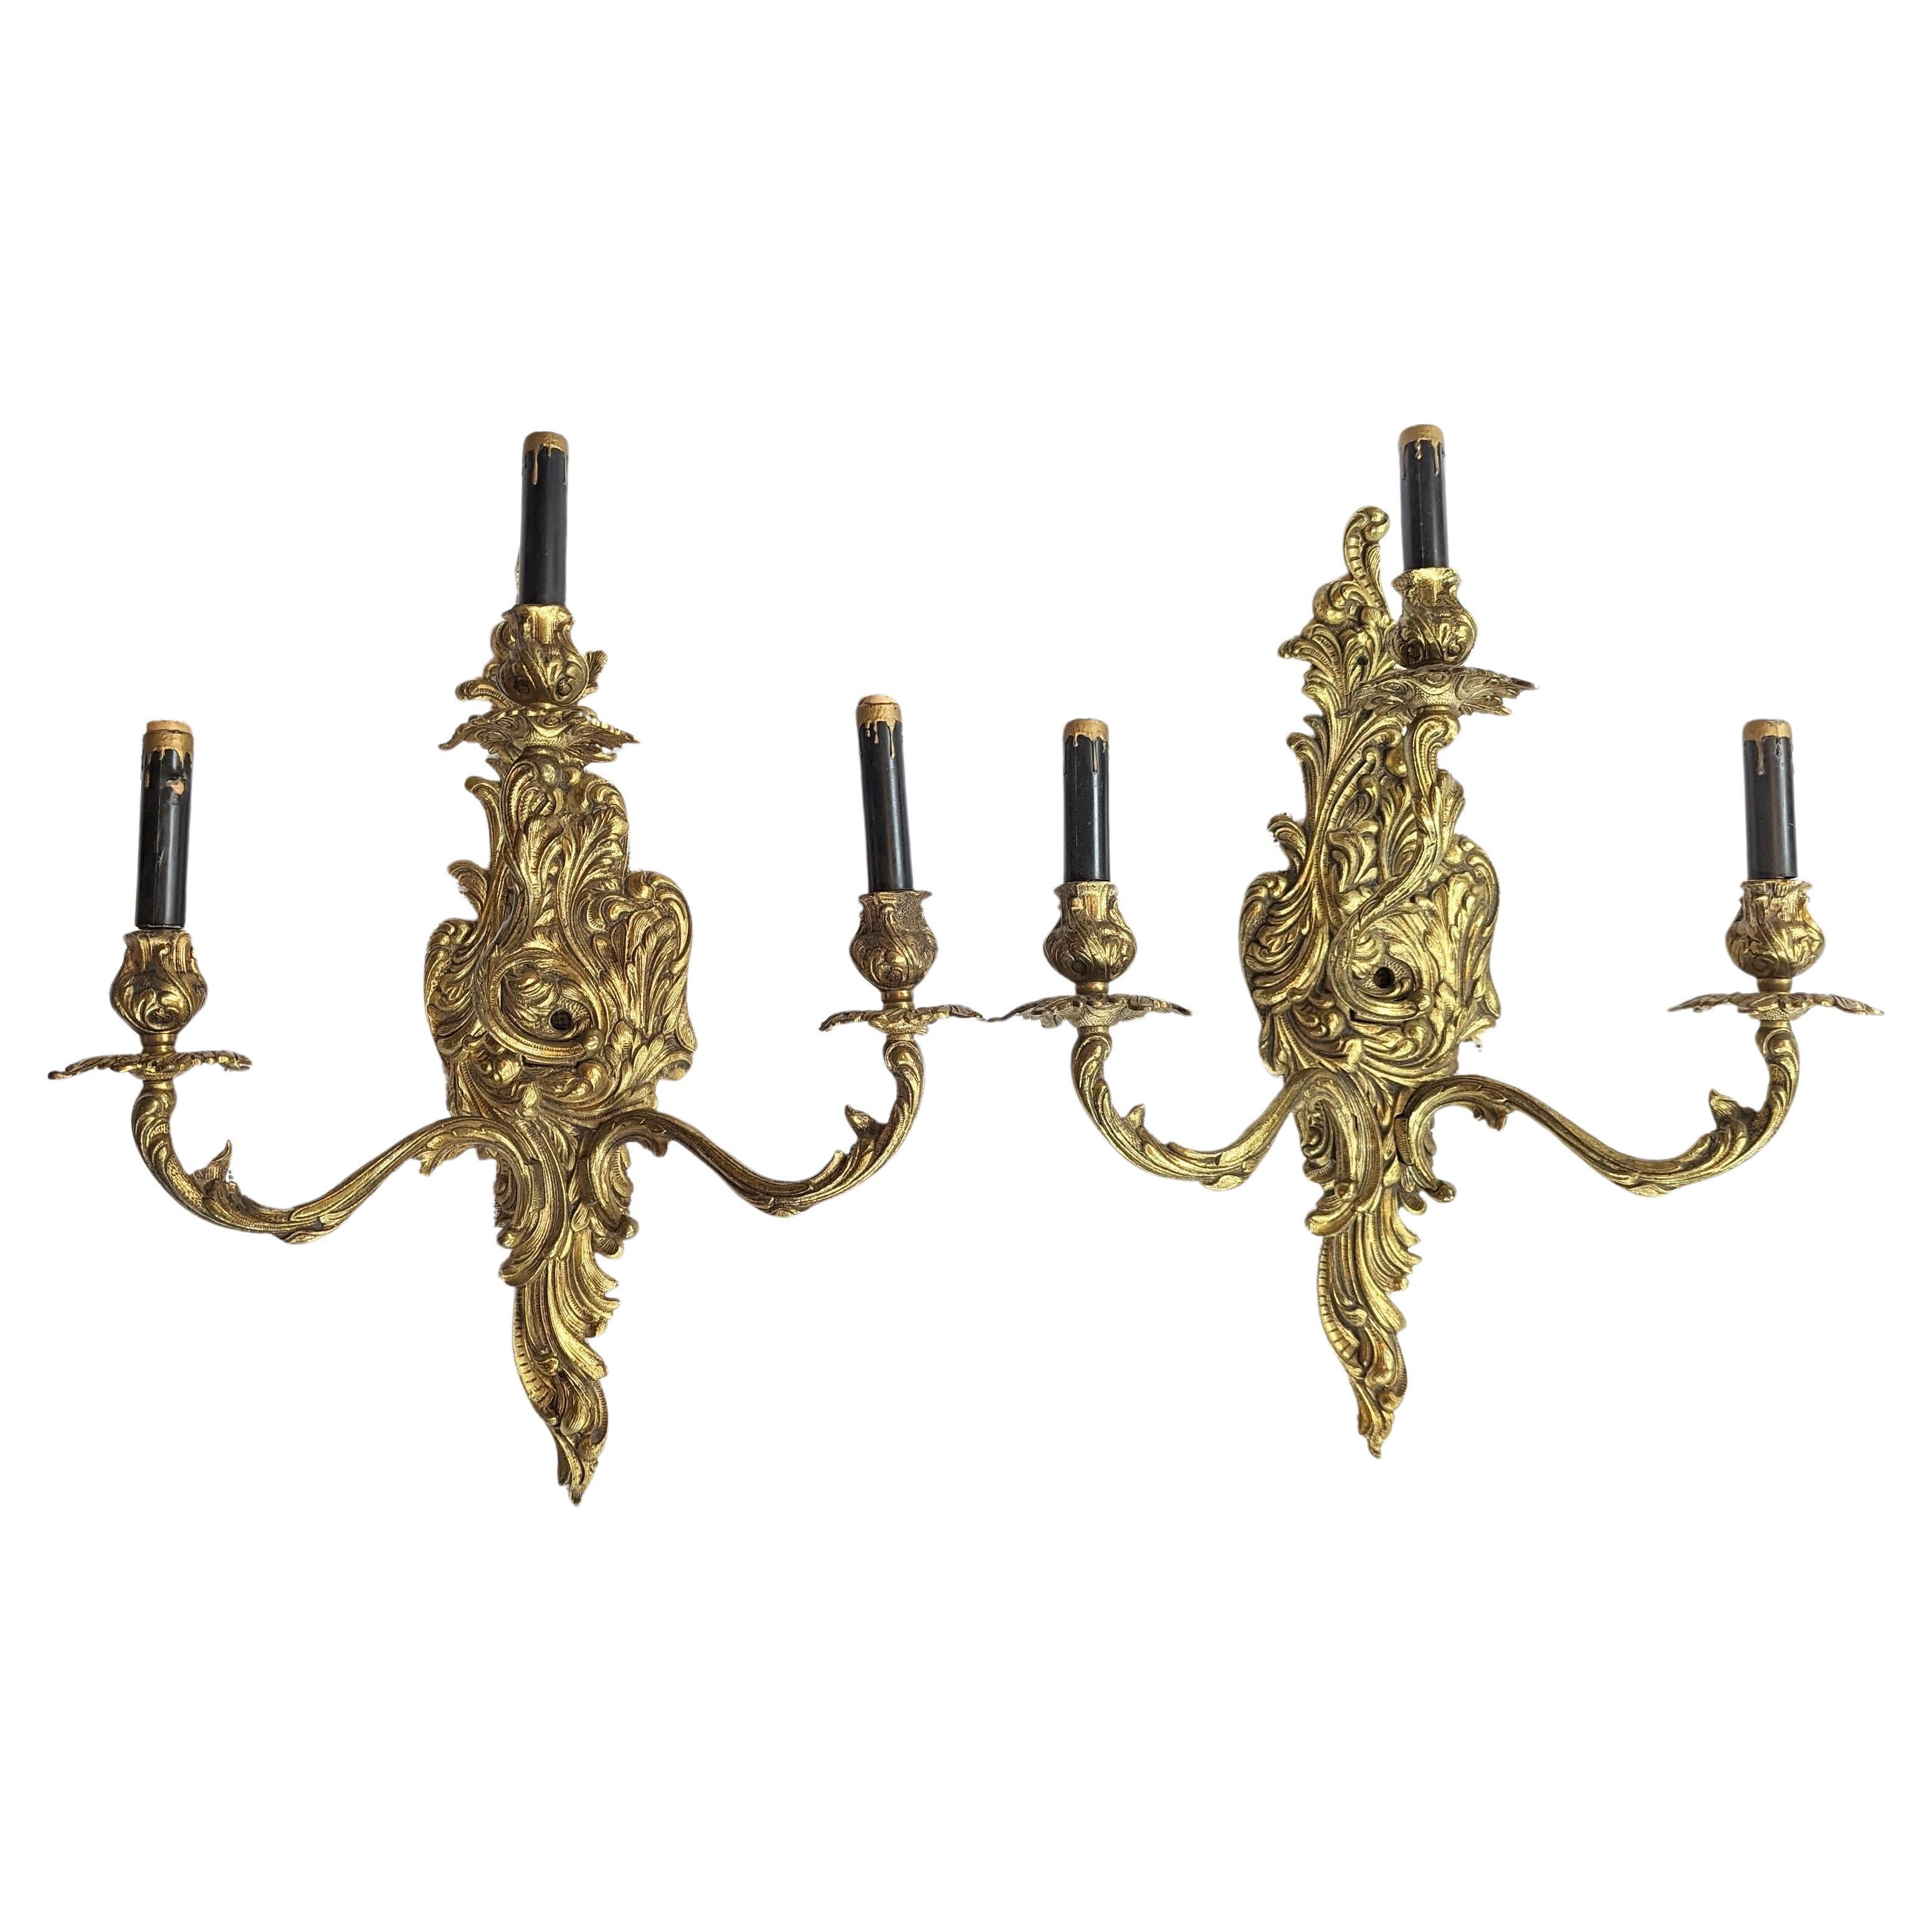 Pair of Antique French Gilded Sconces - 3 Light Armed Sconce European